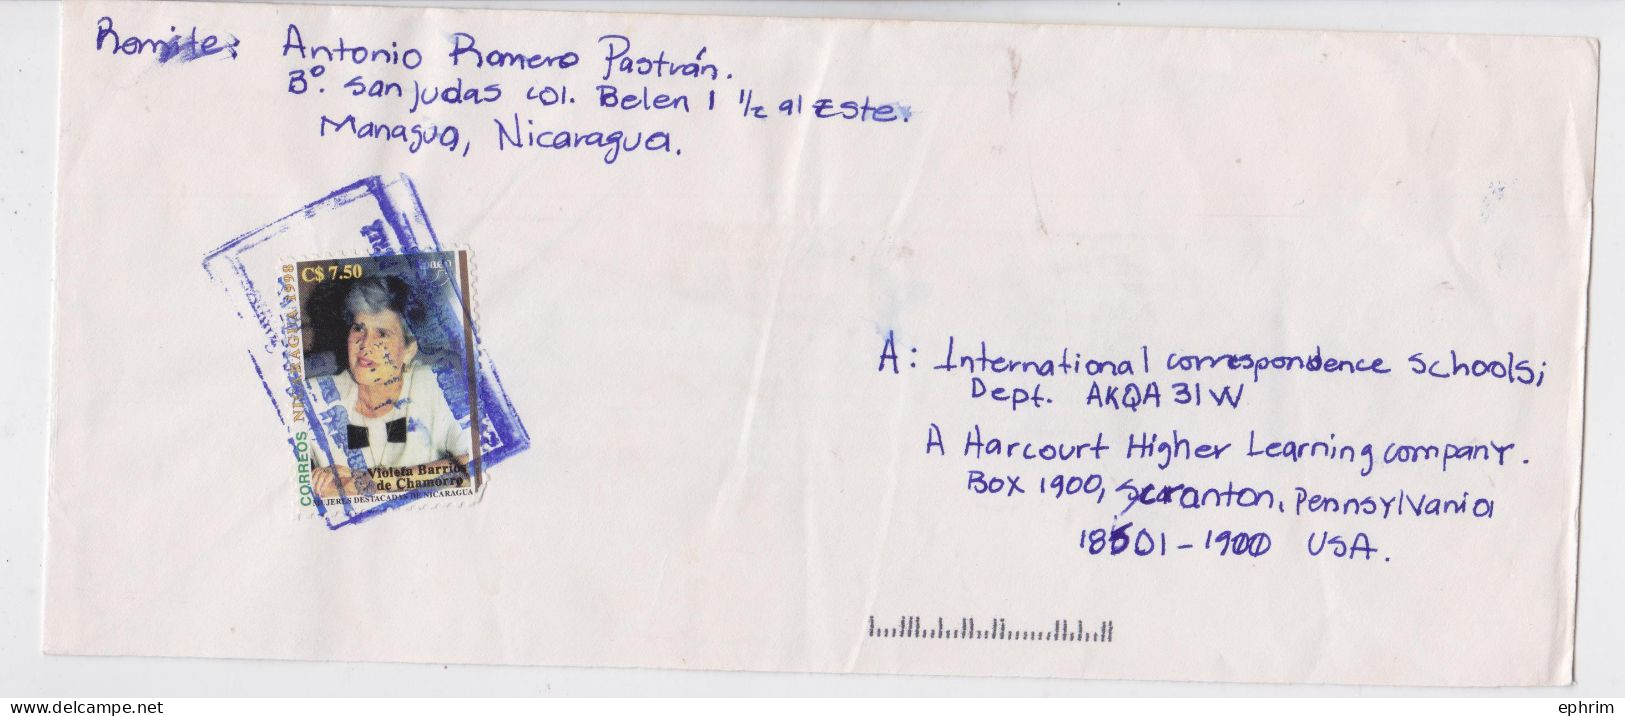 Nicaragua Managua Lettre Timbre 1998 Stamp Air Mail Cover Sello Correo Aereo - Nicaragua